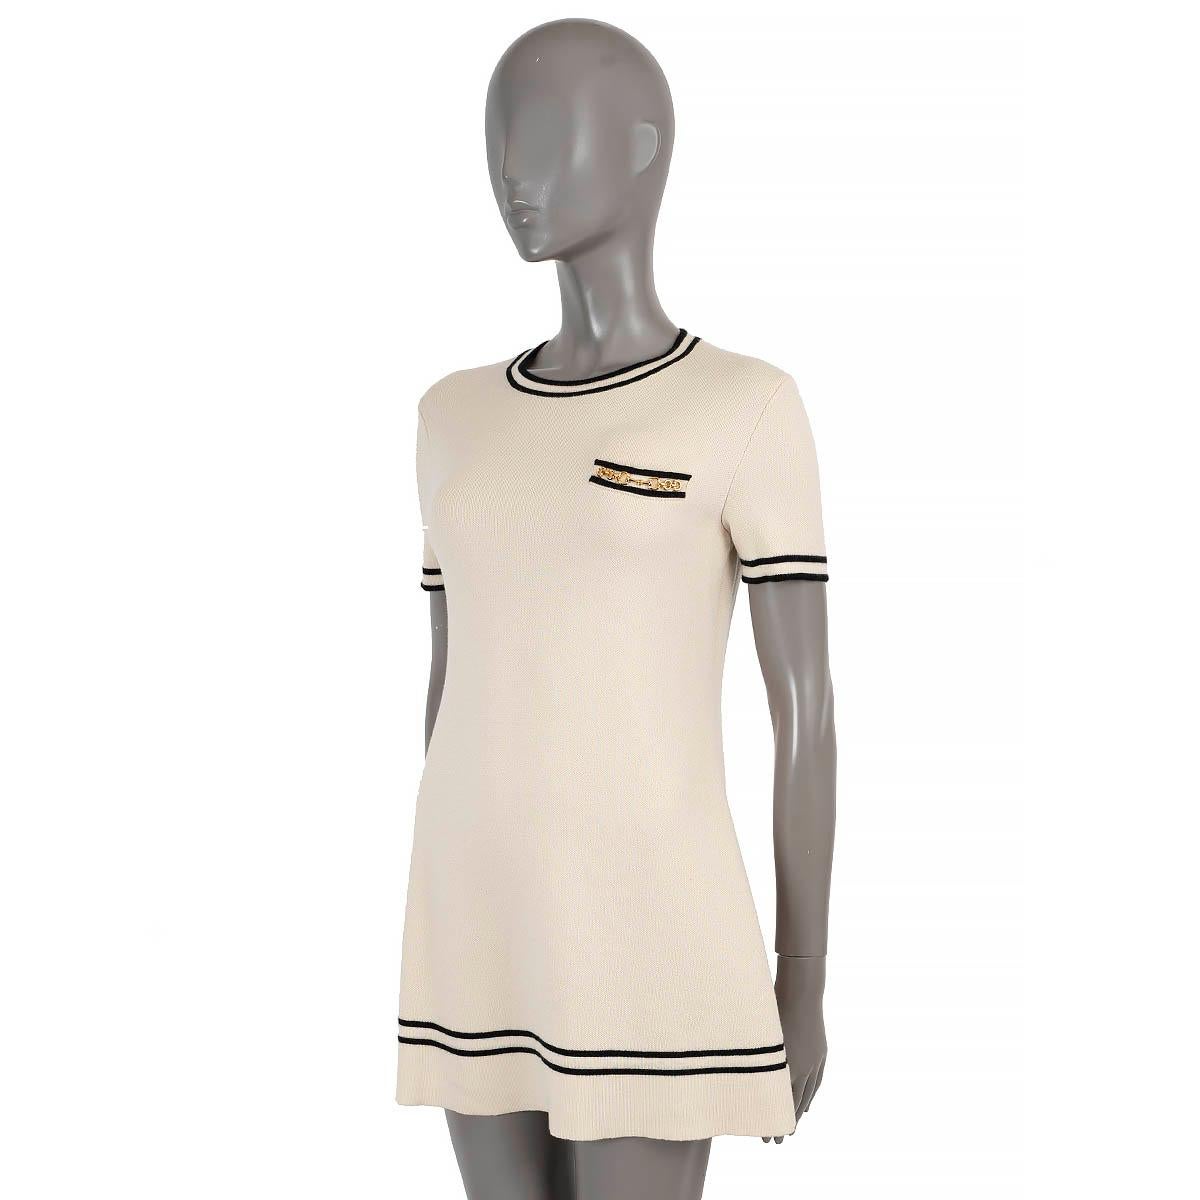 100% authentic Gucci knit dress in white wool (100% - please note the content tag is missing) with contrasting black strip trims. Features a relaxed silhouette, crewneck, short sleeves and chest pocket with horsebit chain detail in gold-tone.